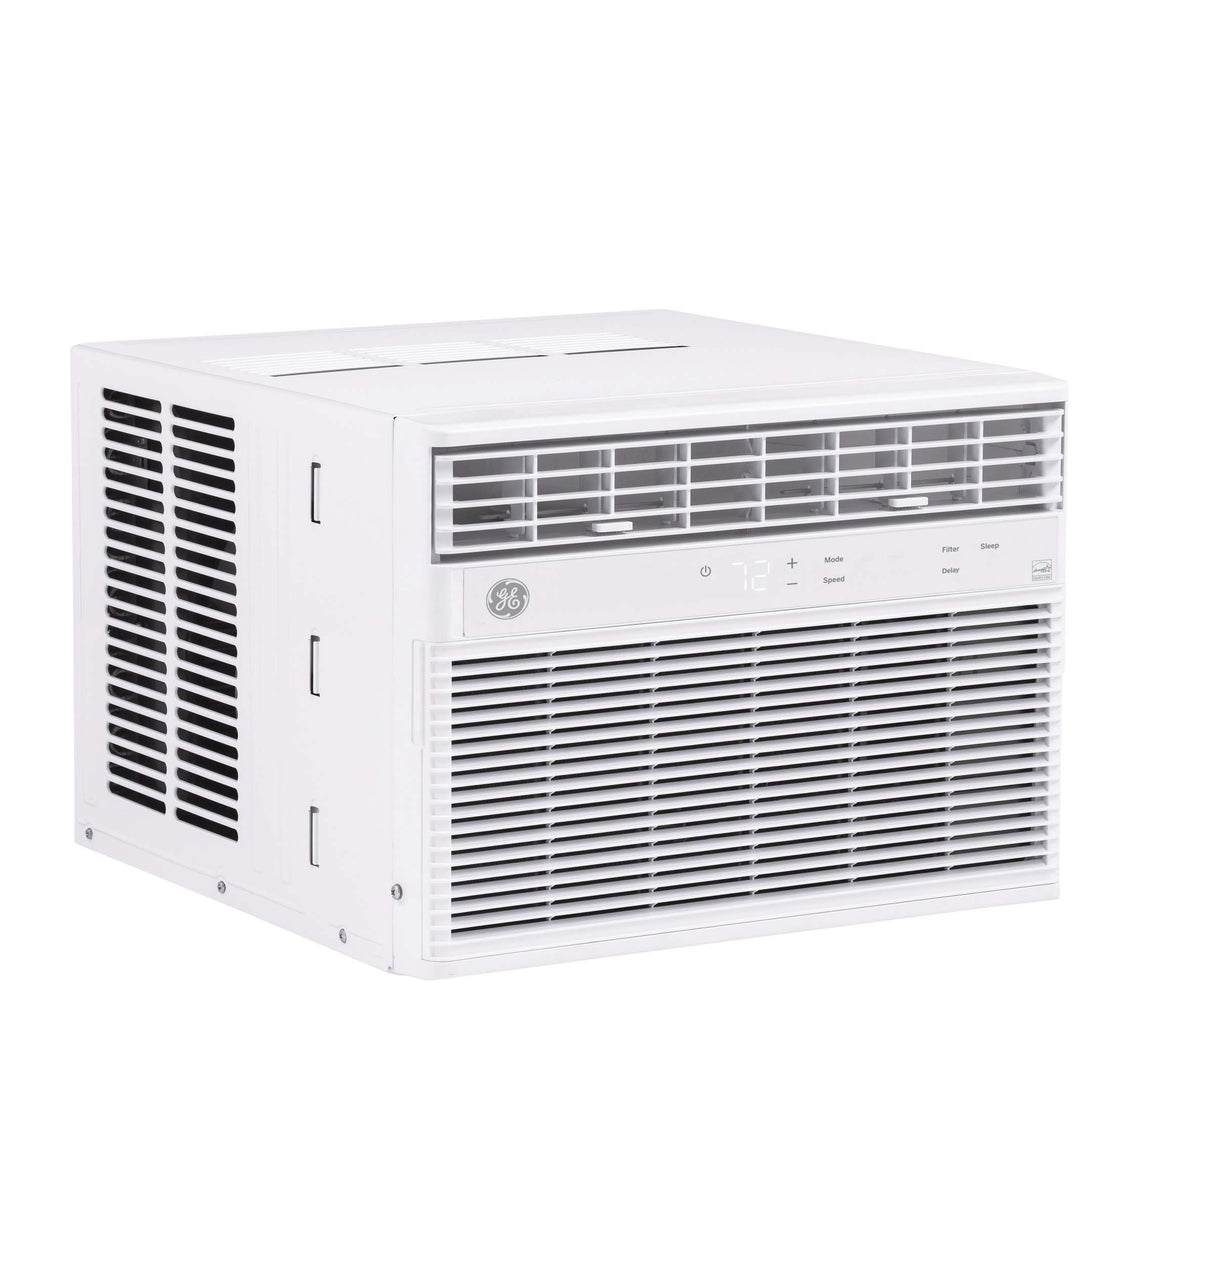 GE(R) 12,000 BTU Heat/Cool Electronic Window Air Conditioner for Large Rooms up to 550 sq. ft. - (AHE12DZ)